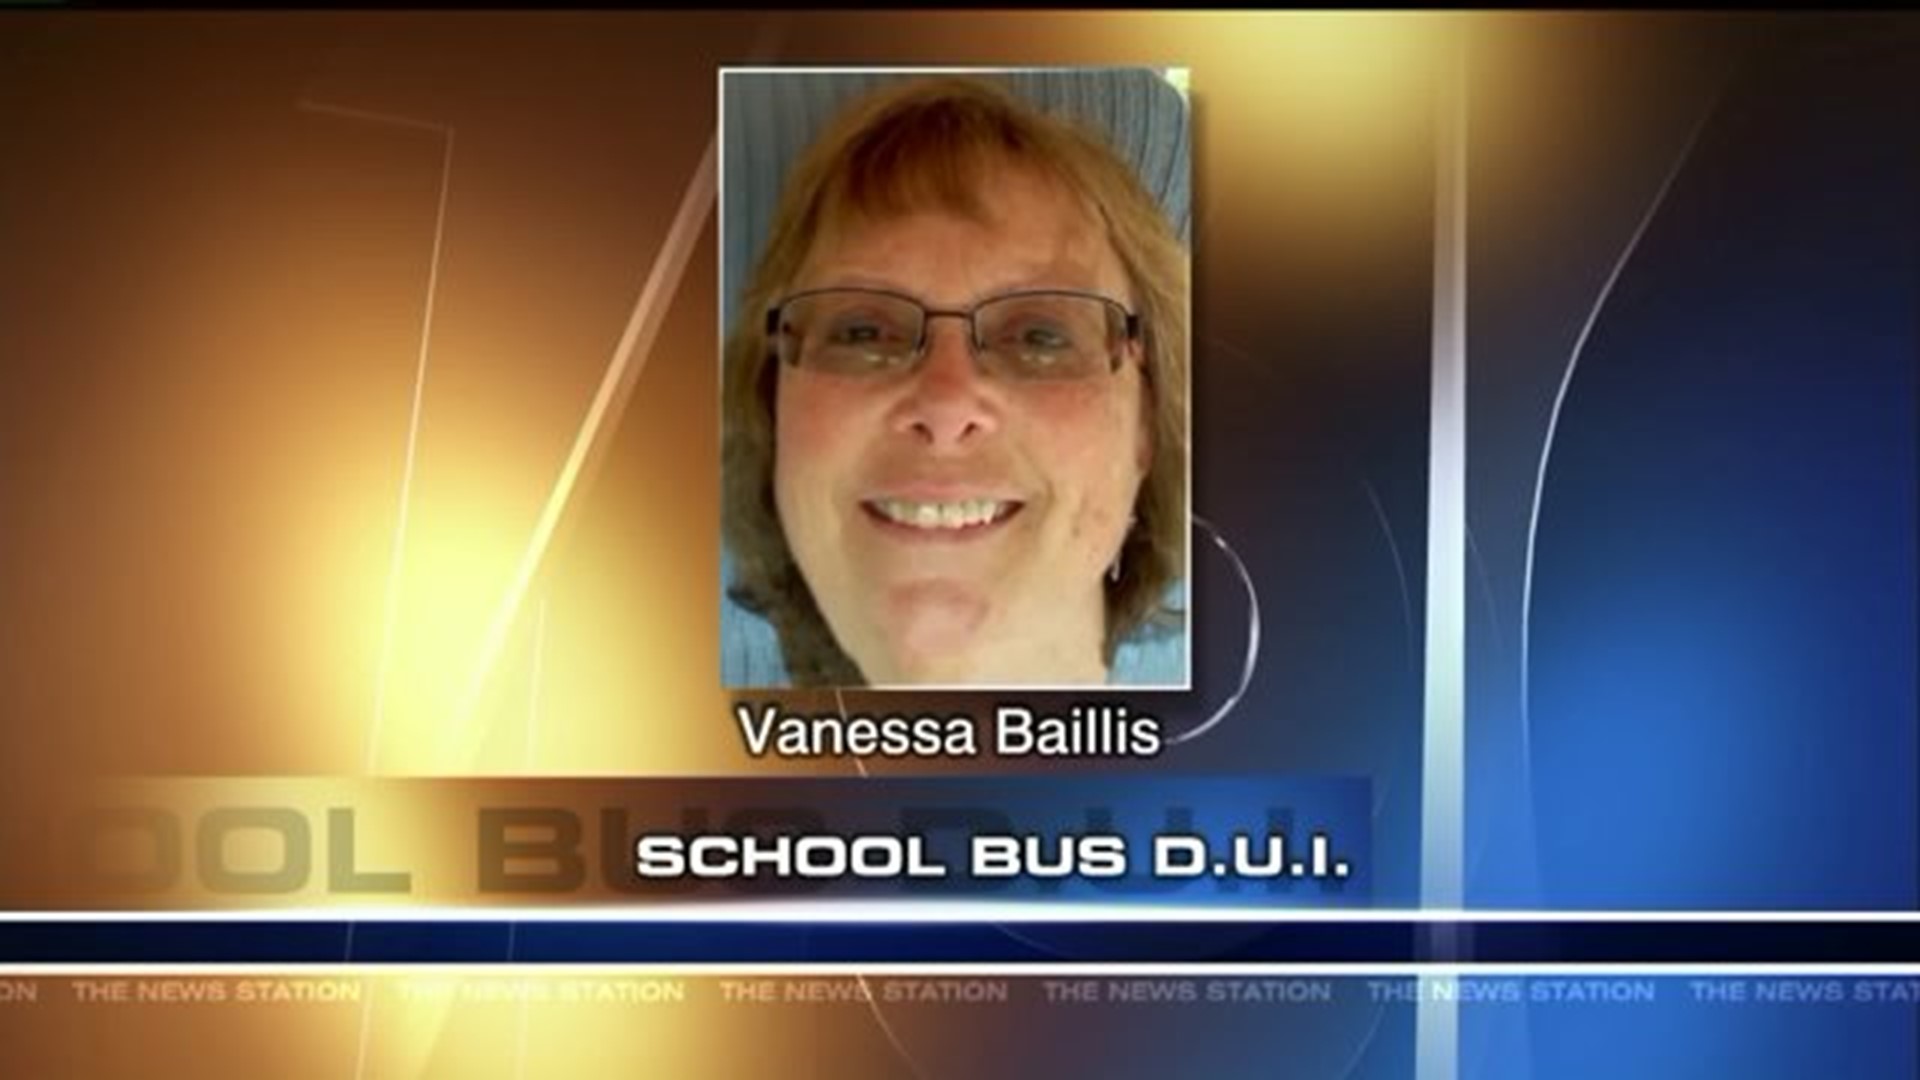 Stroudsburg School Bus Driver Facing DUI Charges